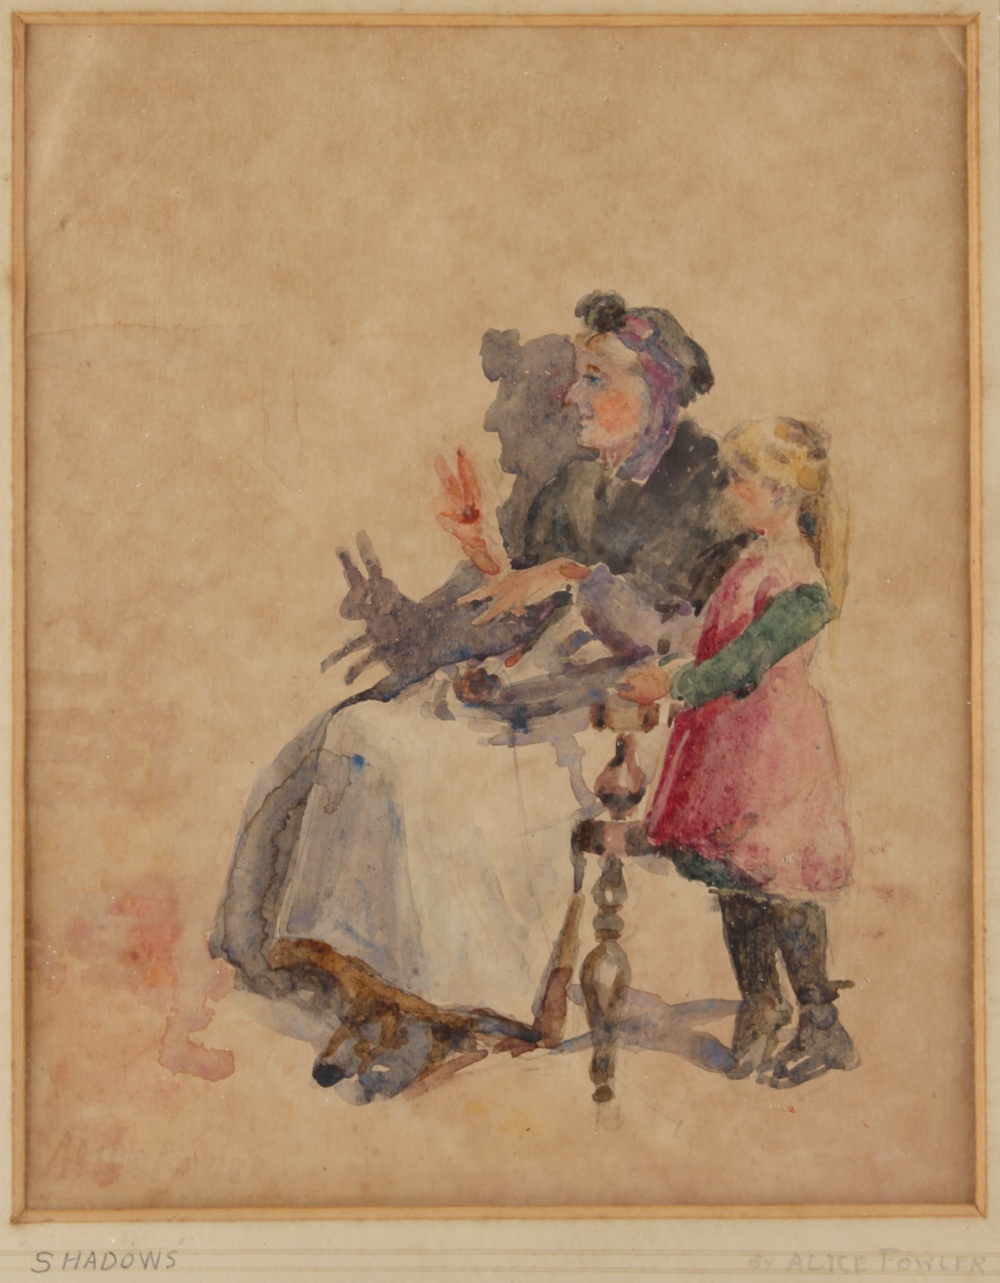 Property of a gentleman - Alice Fowler (early 20th century) - 'SHADOWS' - watercolour, 9.85 by 7.